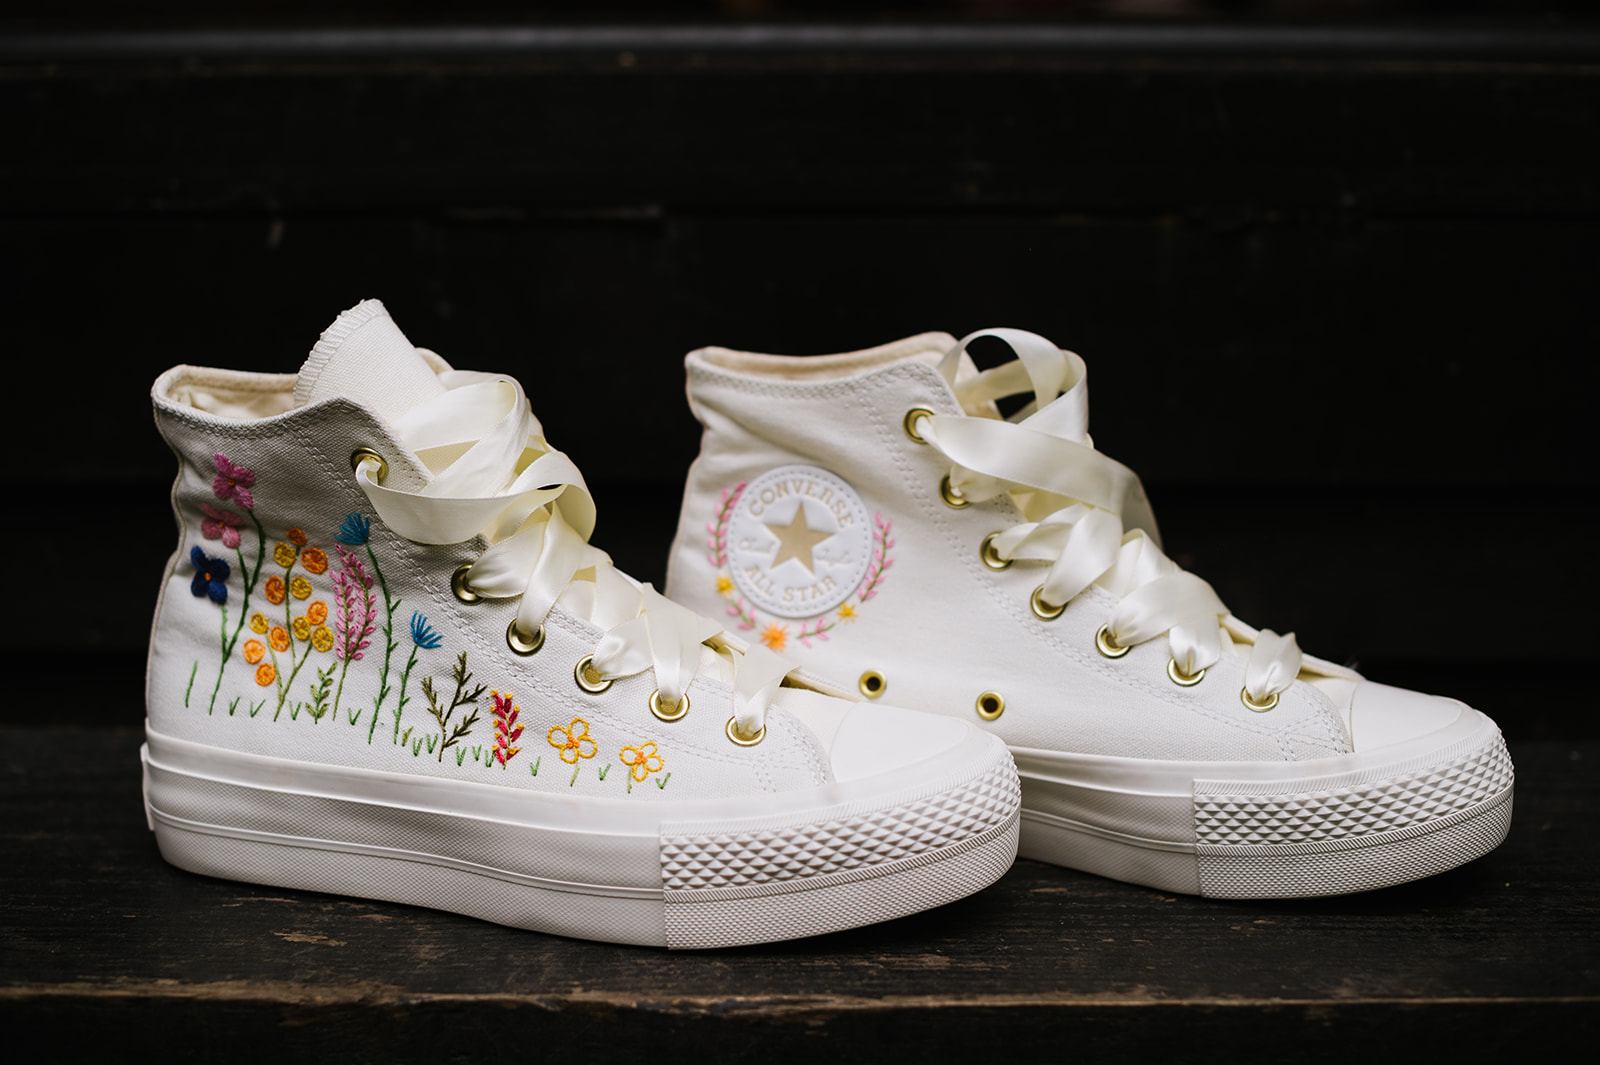 The bride's embroidered white wedding shoes were converse with colourful flowers stitched on the sides.